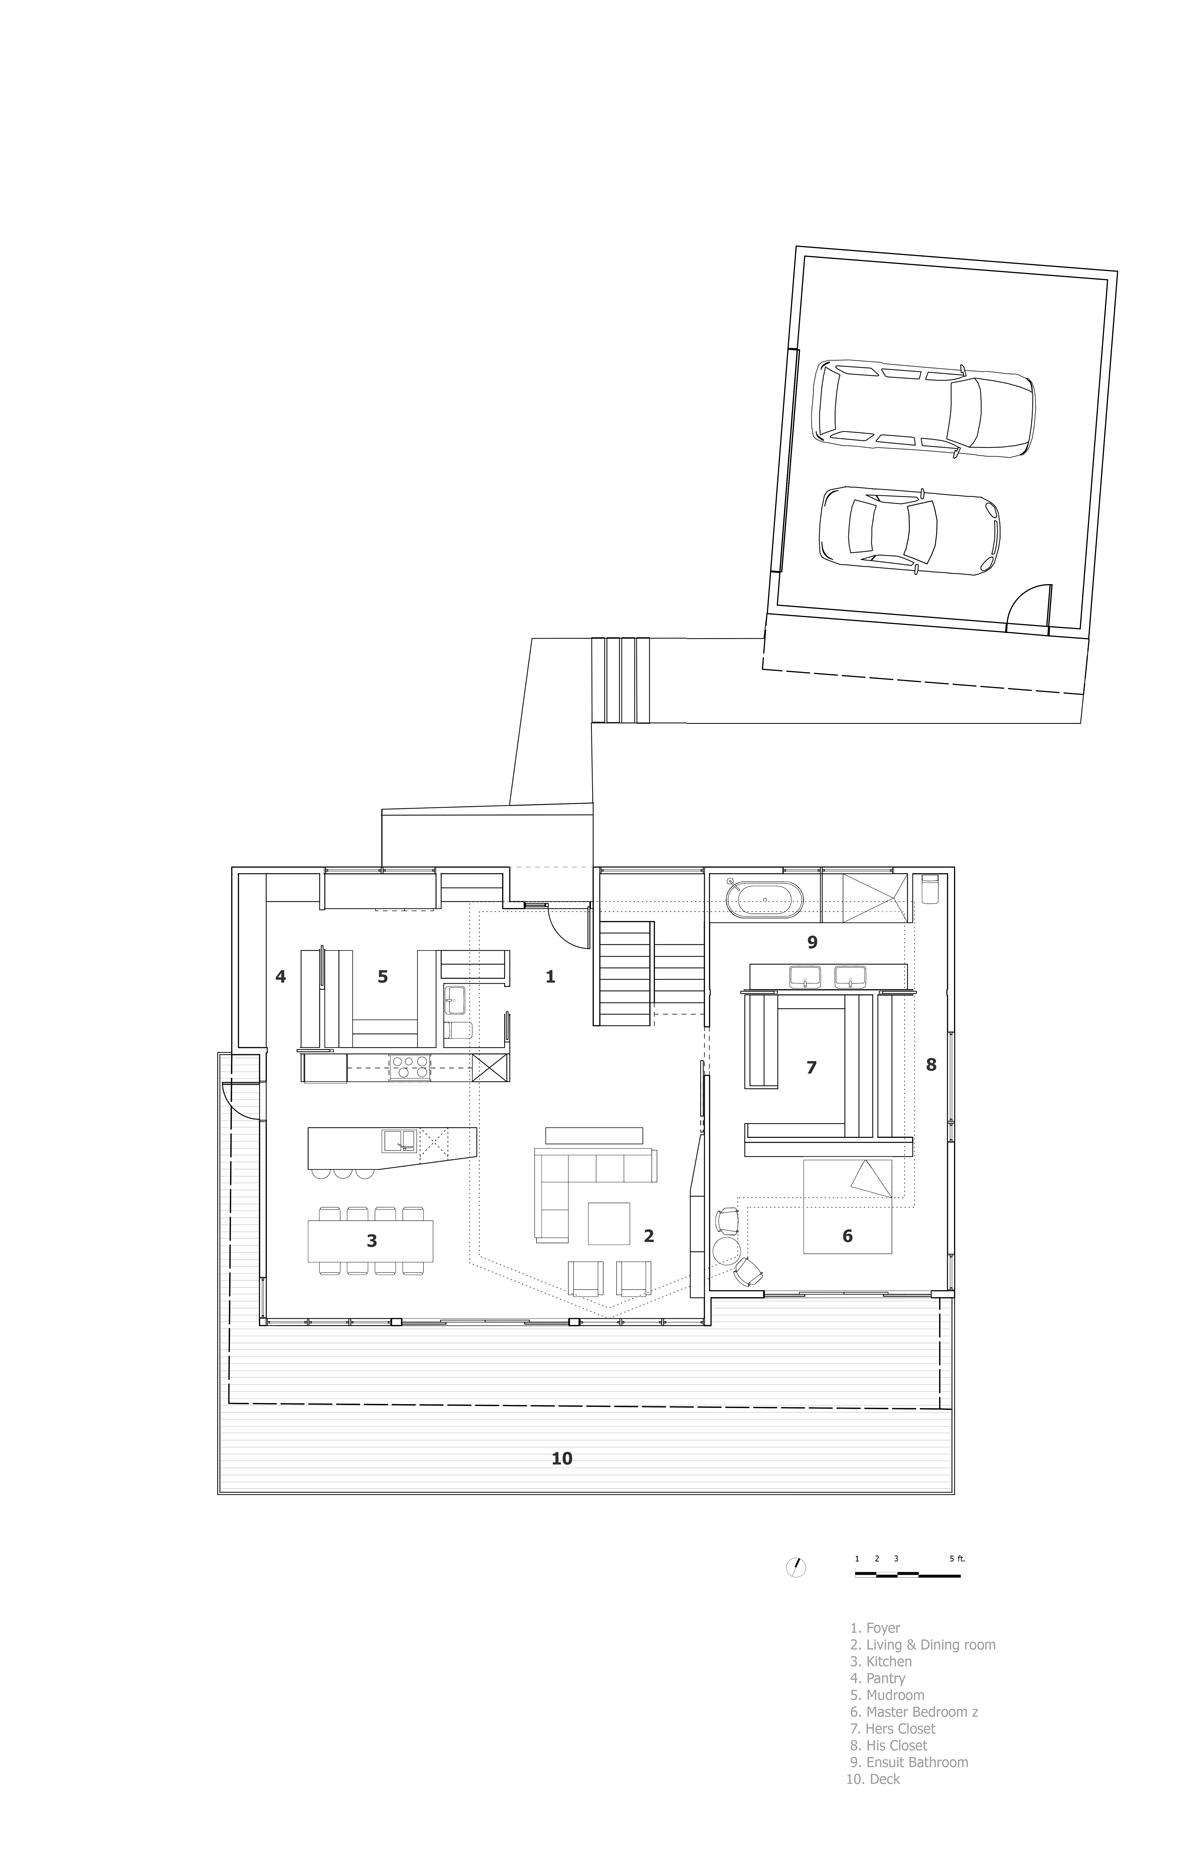 Unit 7 Architecture | Projects - Lake of the Prairies Summer Home - MAIN FLOOR PLAN